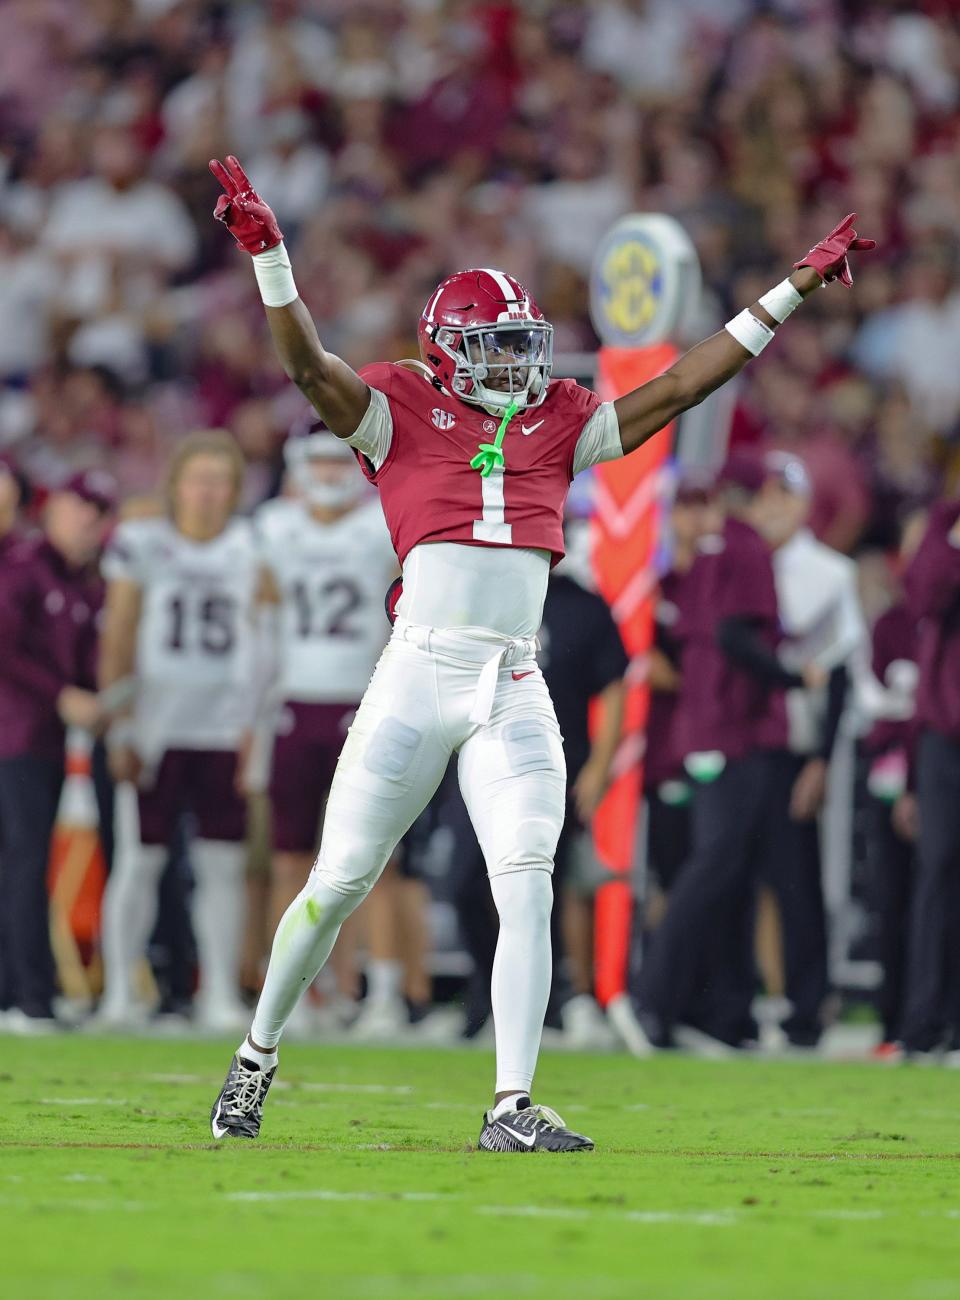 TUSCALOOSA, AL - OCTOBER 22: Kool-Aid McKinstry #1 of the Alabama Crimson Tide celebrates a big defensive stop against the Mississippi State Bulldogs at Bryant-Denny Stadium on October 22, 2022 in Tuscaloosa, Alabama. (Photo by Brandon Sumrall/Getty Images)